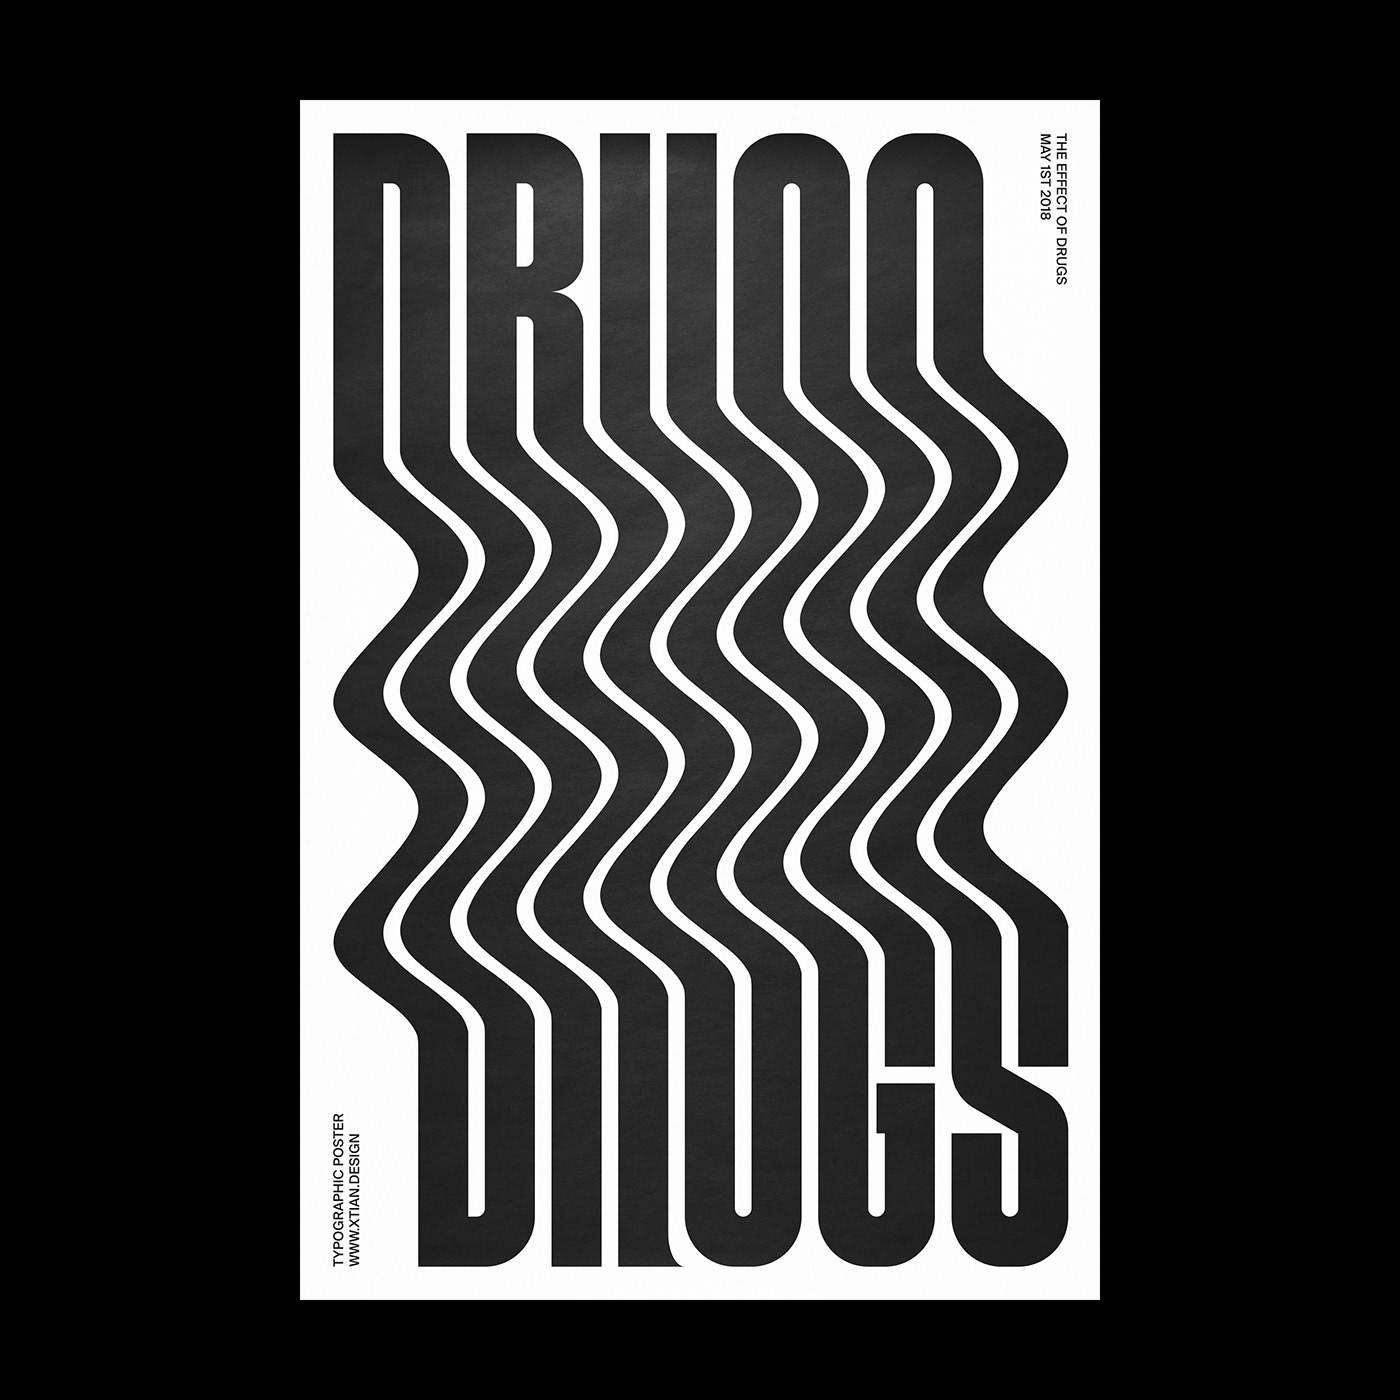 Drugs poster by Xtian Miller